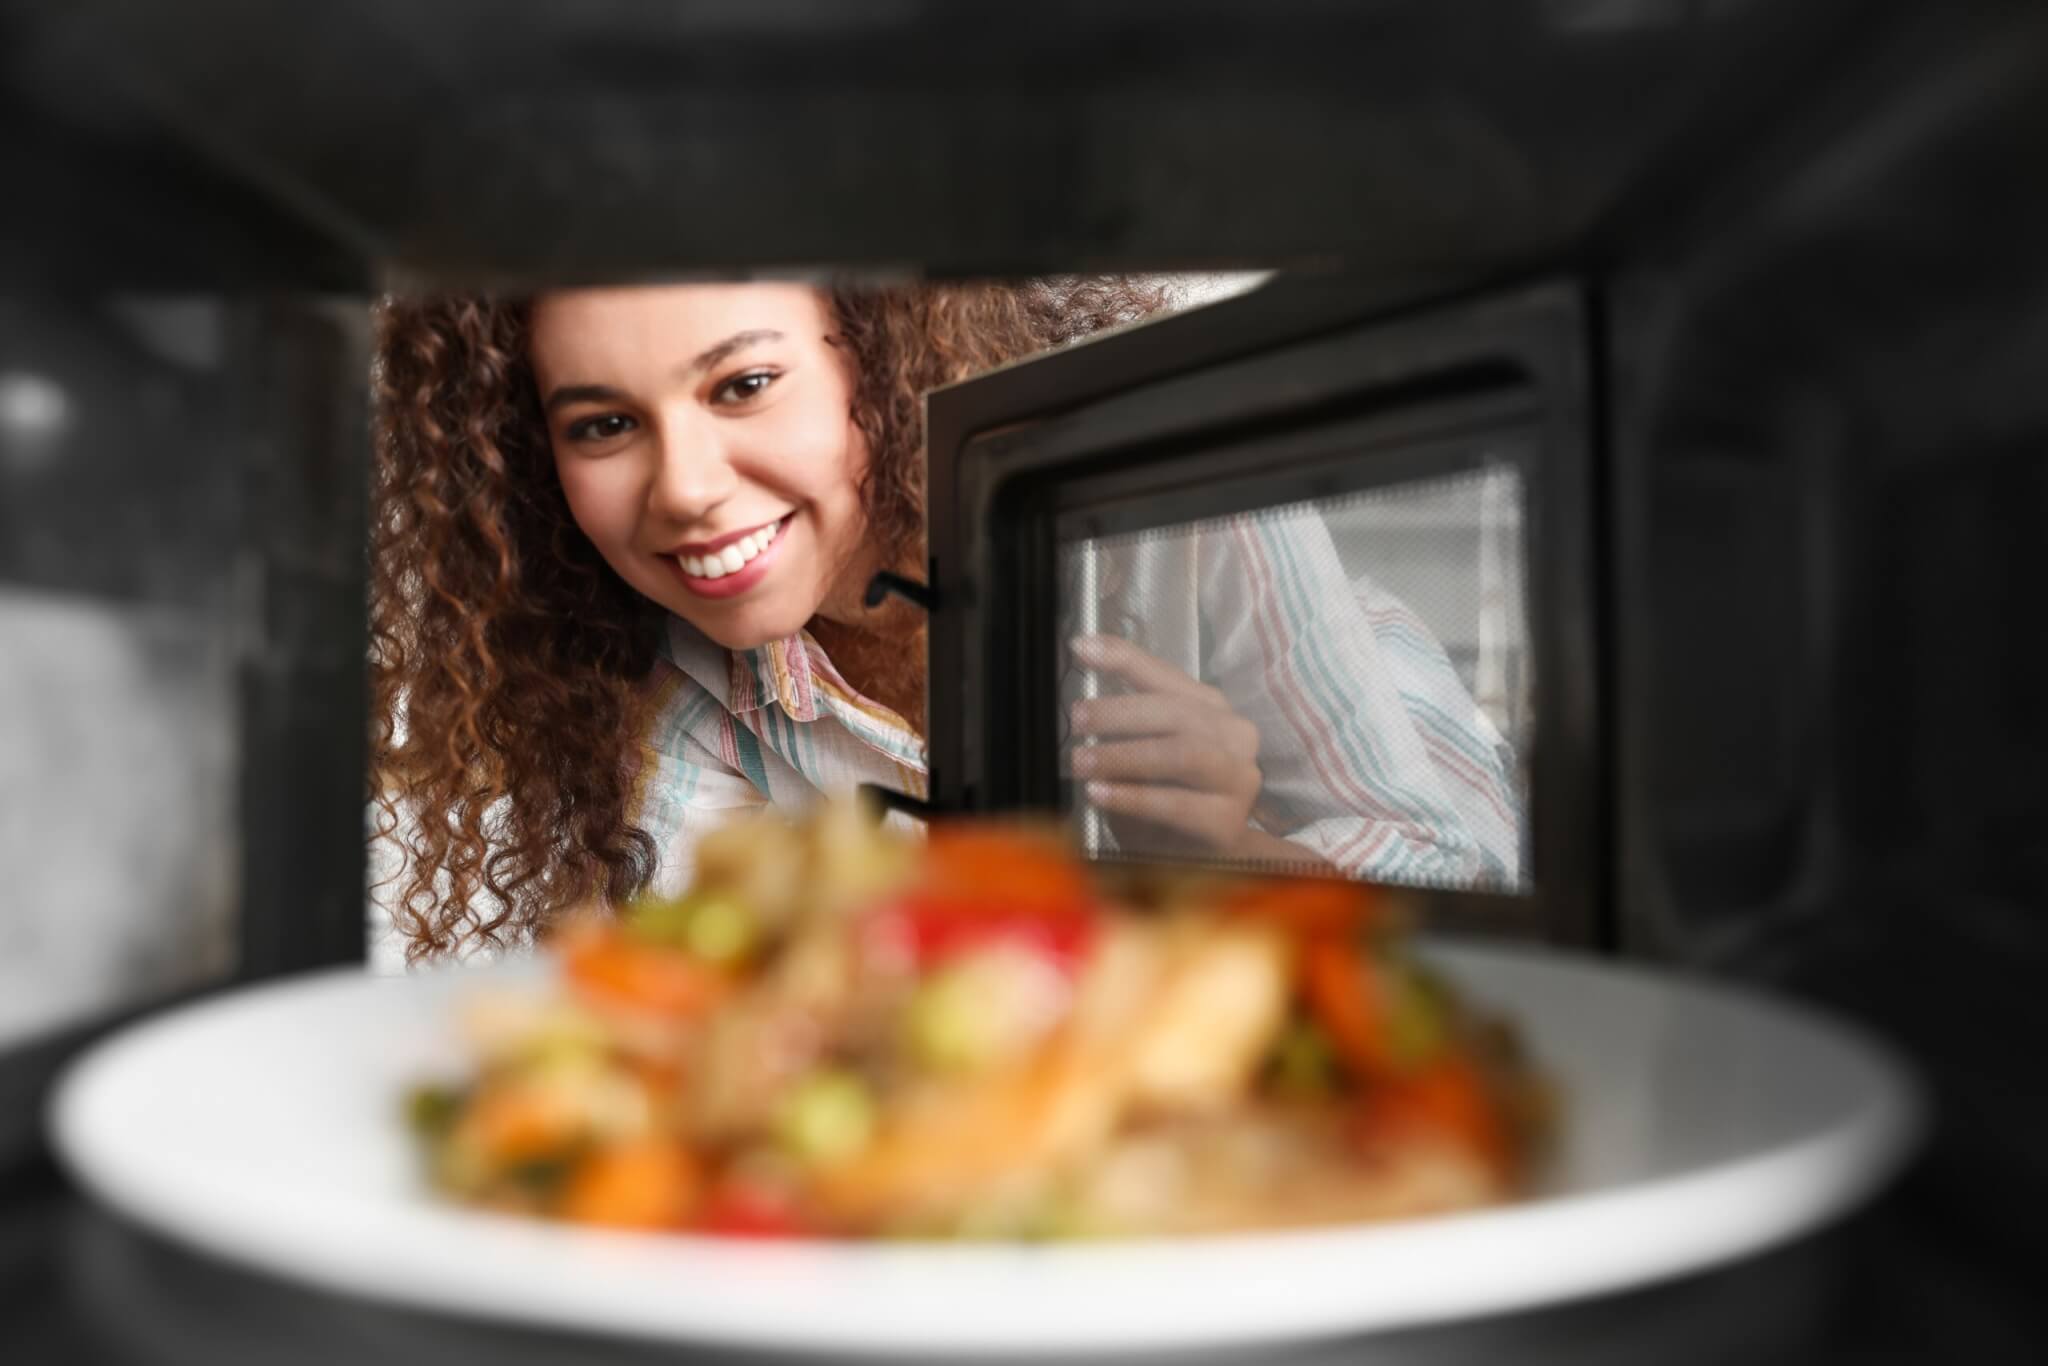 A woman looking into a microwave